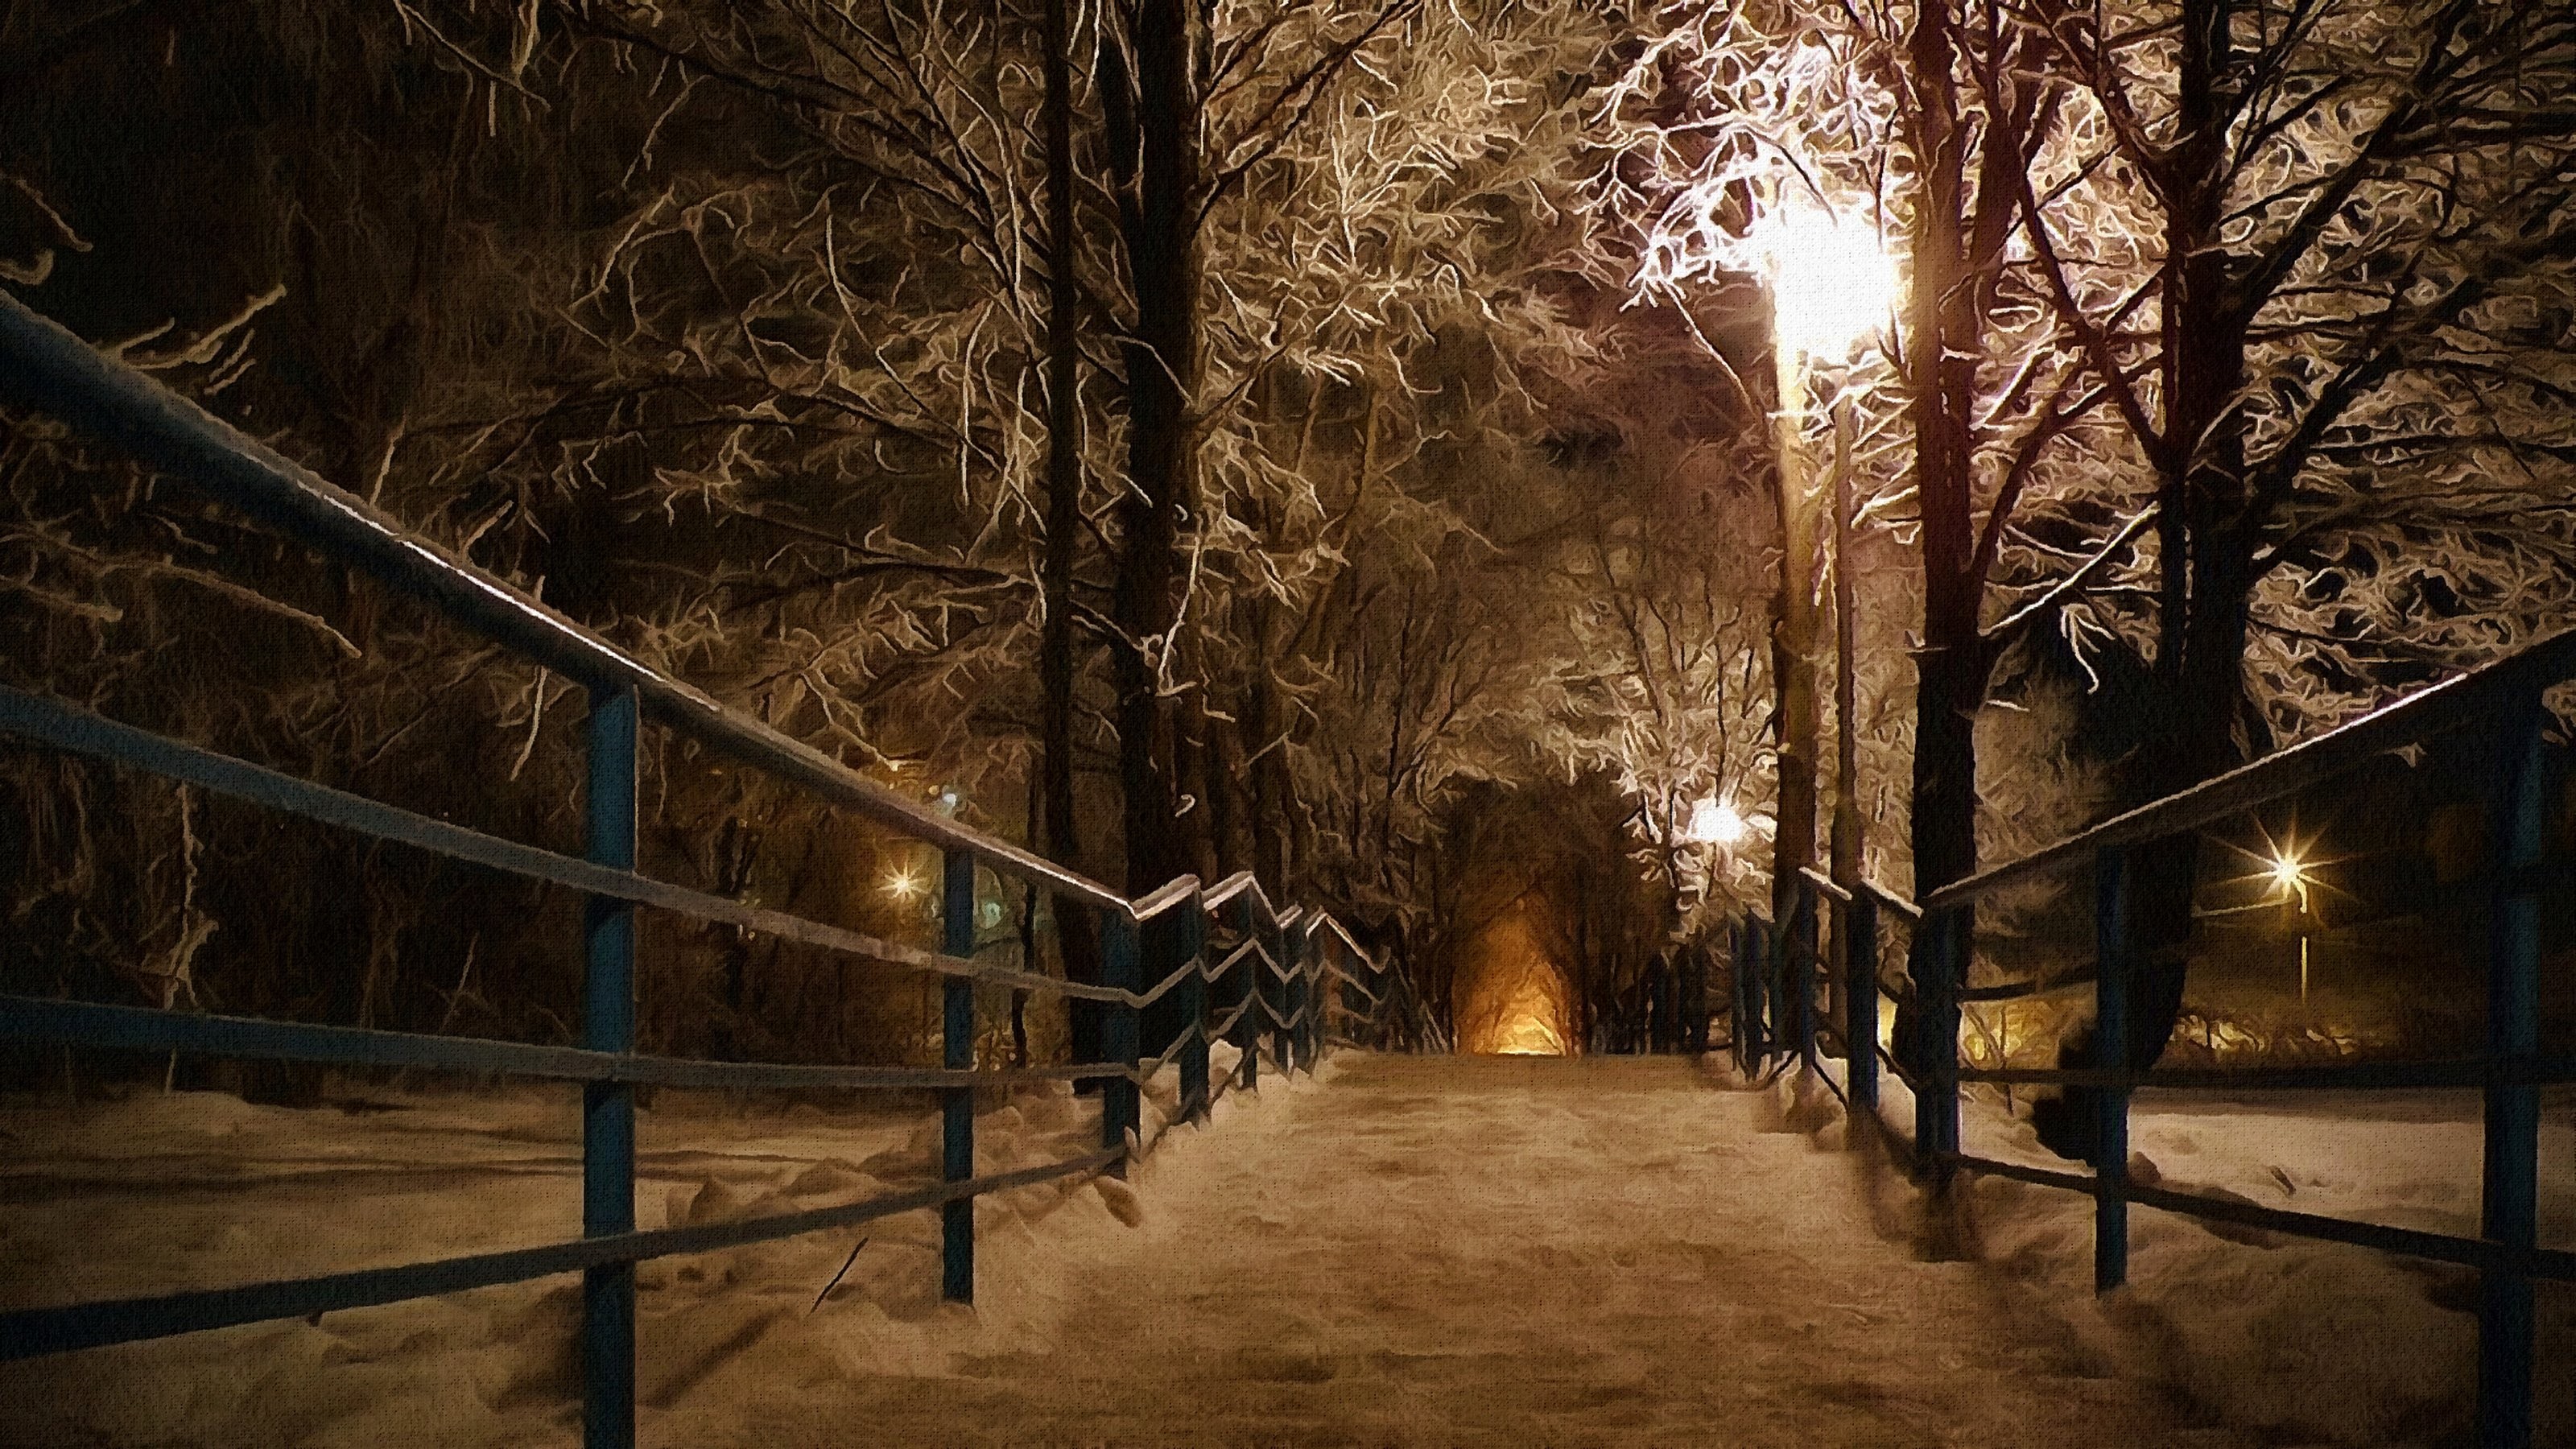 General 3200x1800 snow path effects pattern photoshopped park night outdoors cold winter